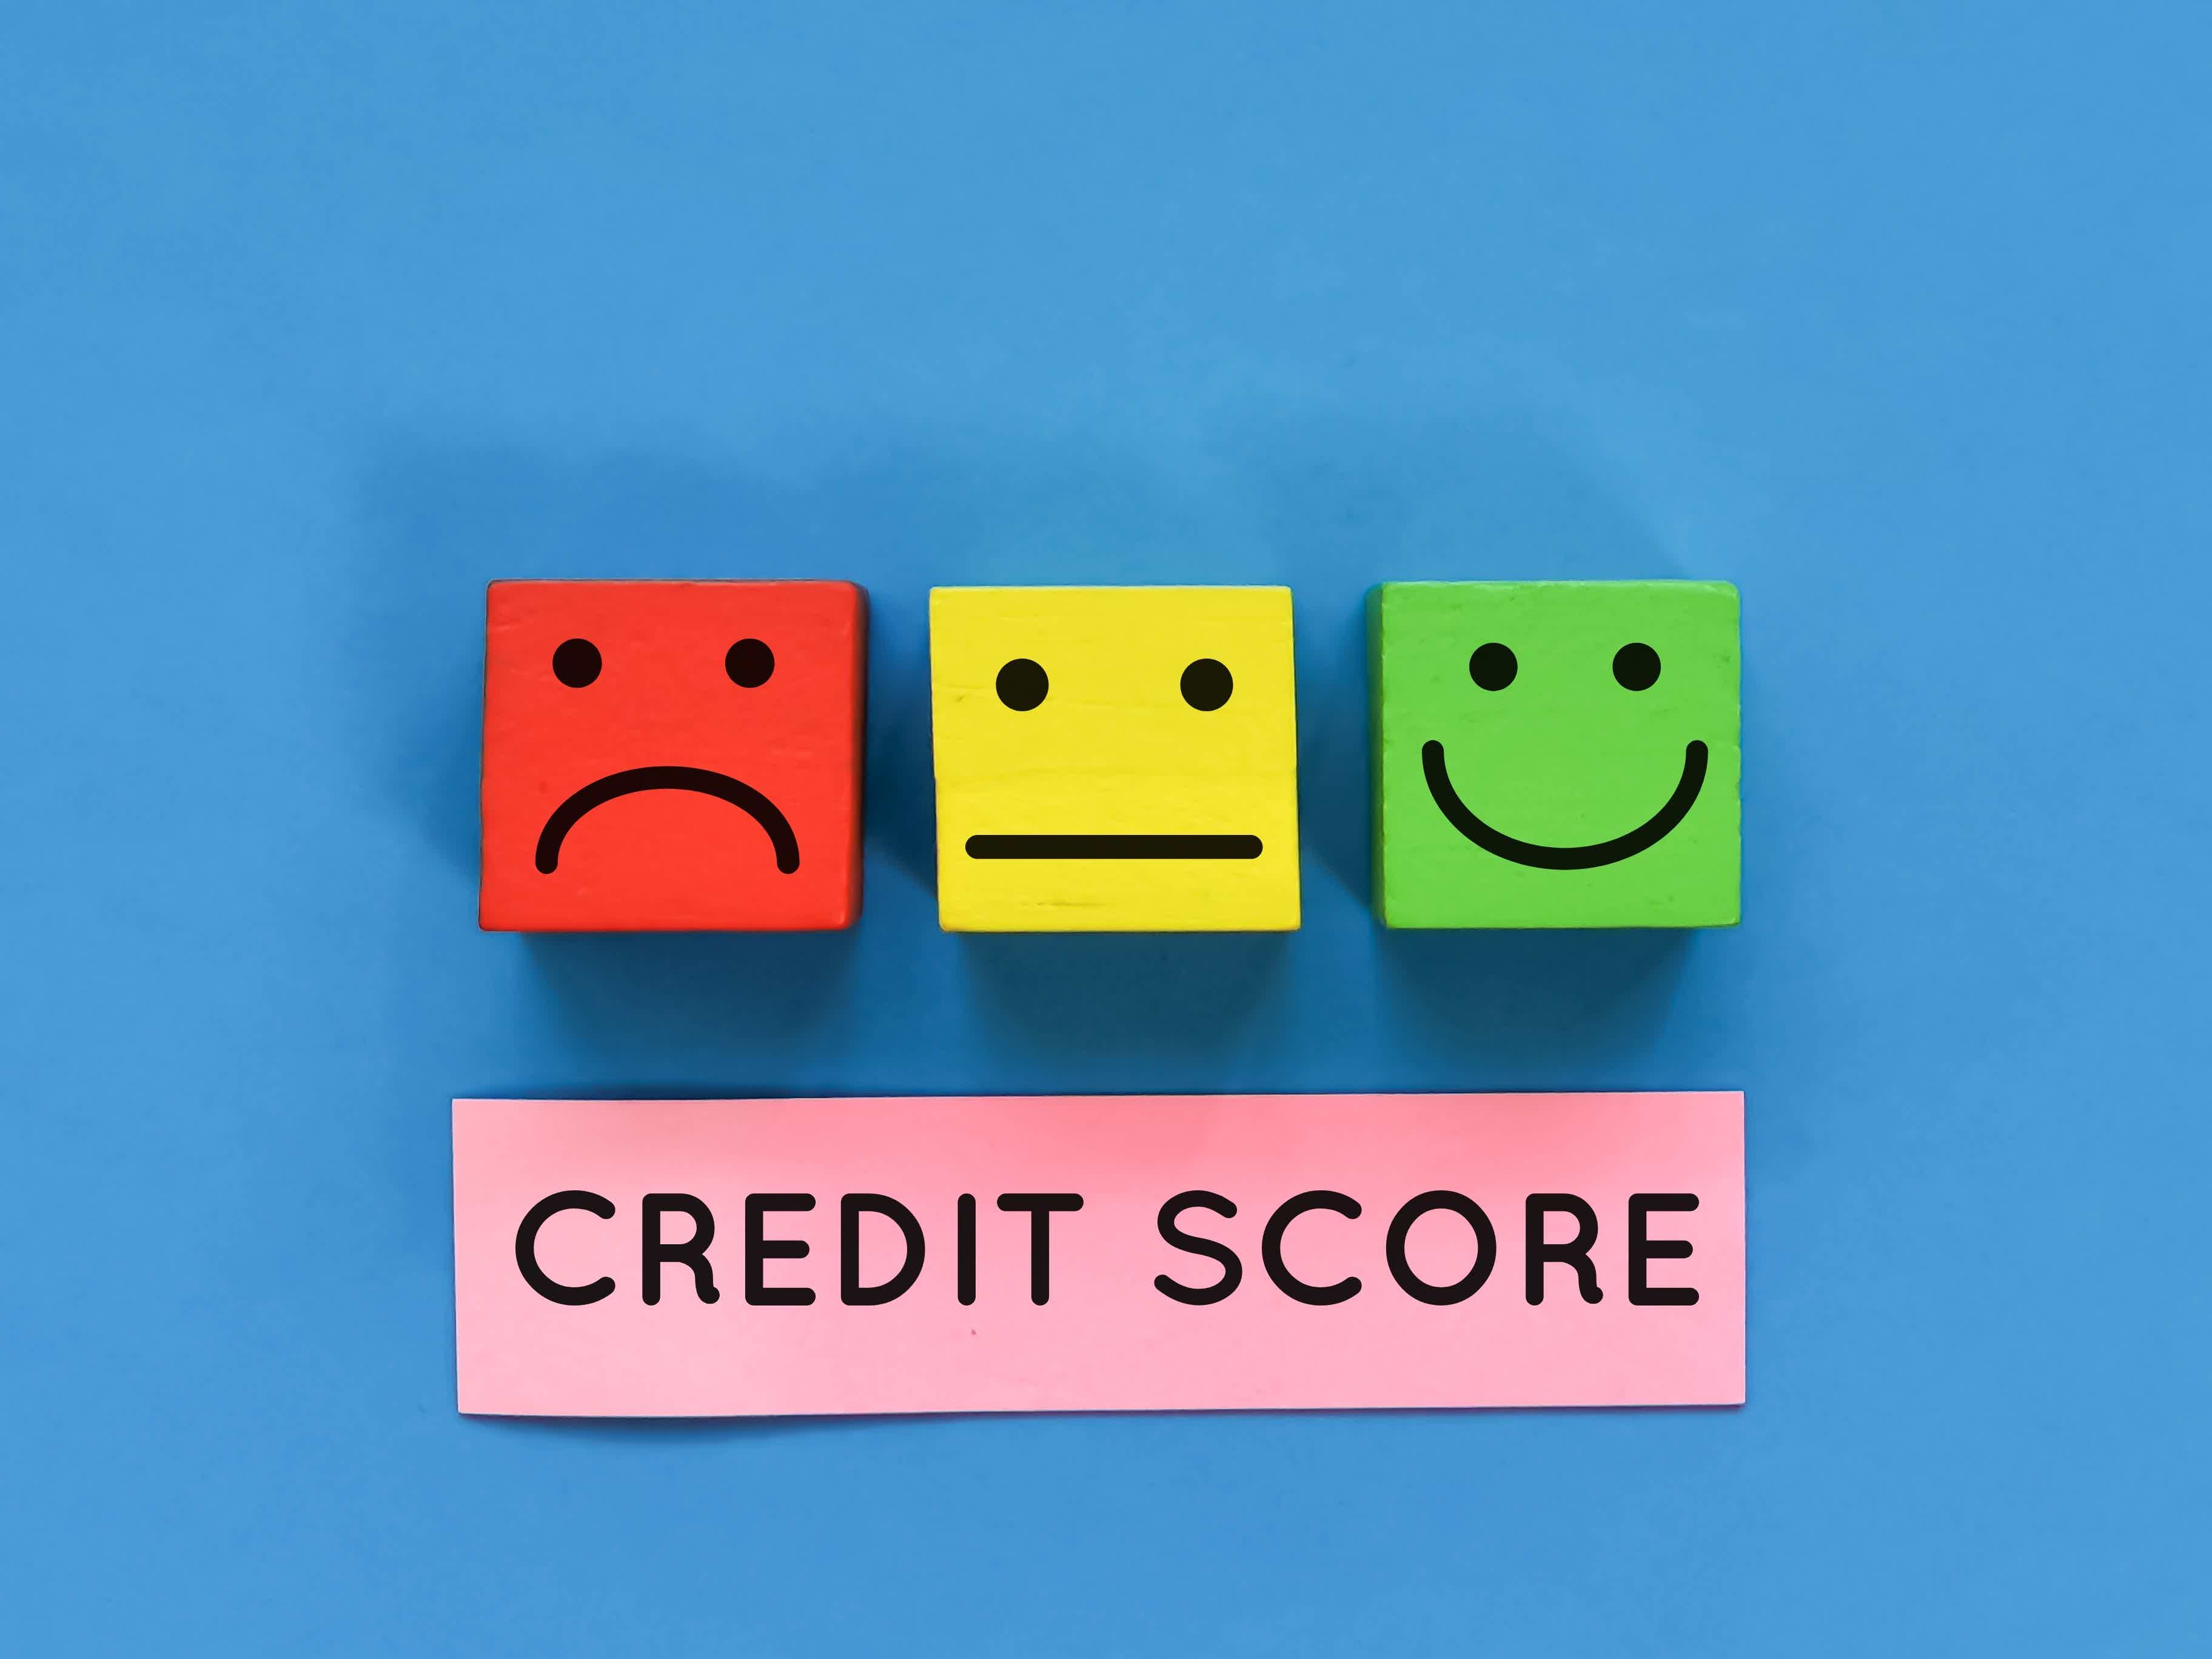 Monitor your credit score if you want to improve it. Source: Adobe Stock.